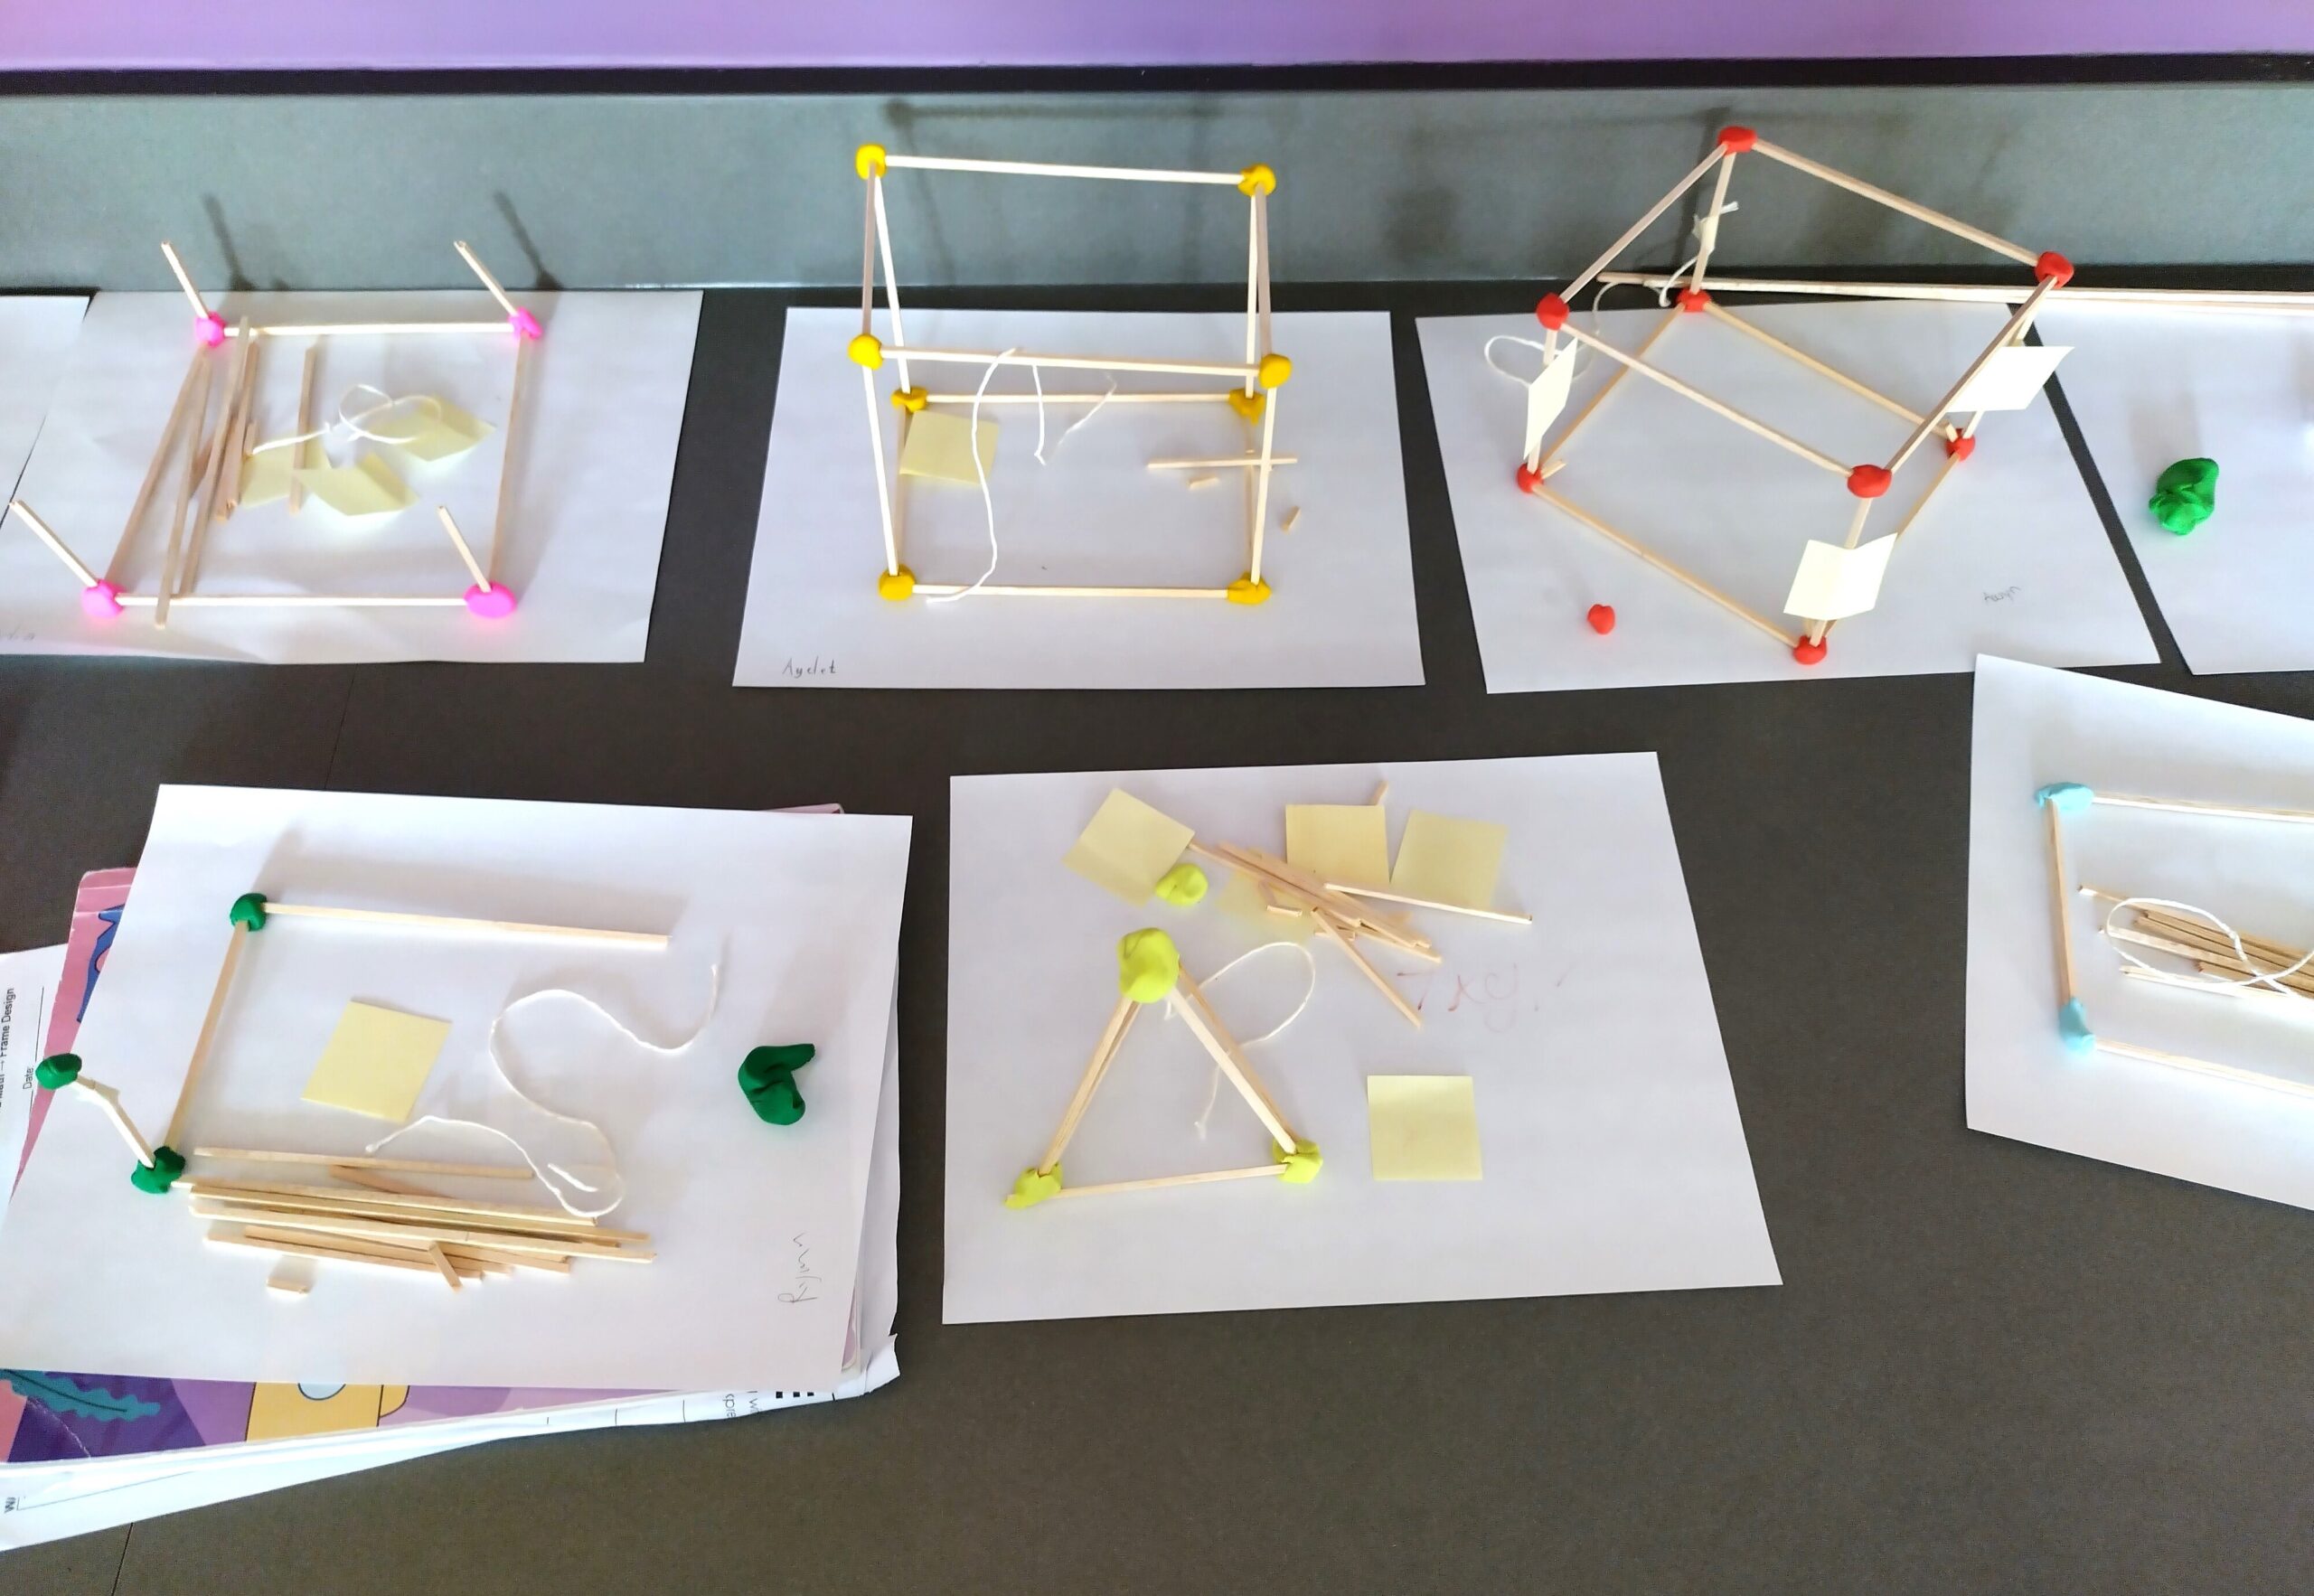 Multiple student projects on a table, featuring geometric structures made from sticks and connectors like clay, some with prominent yellow and red nodes, displayed on white sheets of paper.